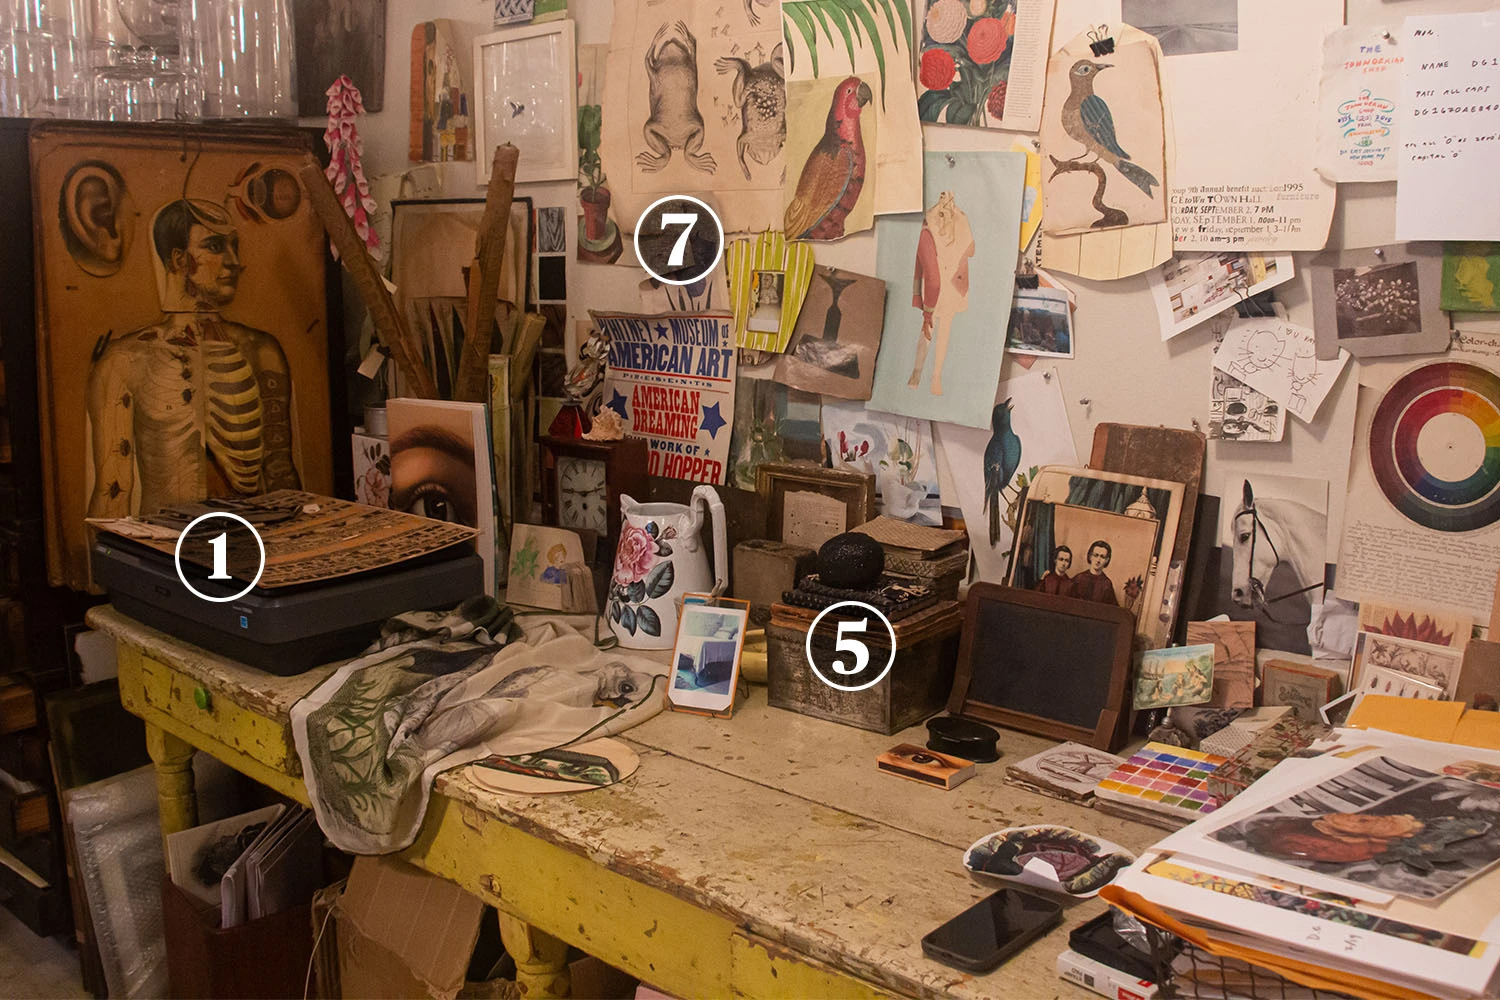 John's studio is filled with history and mystery